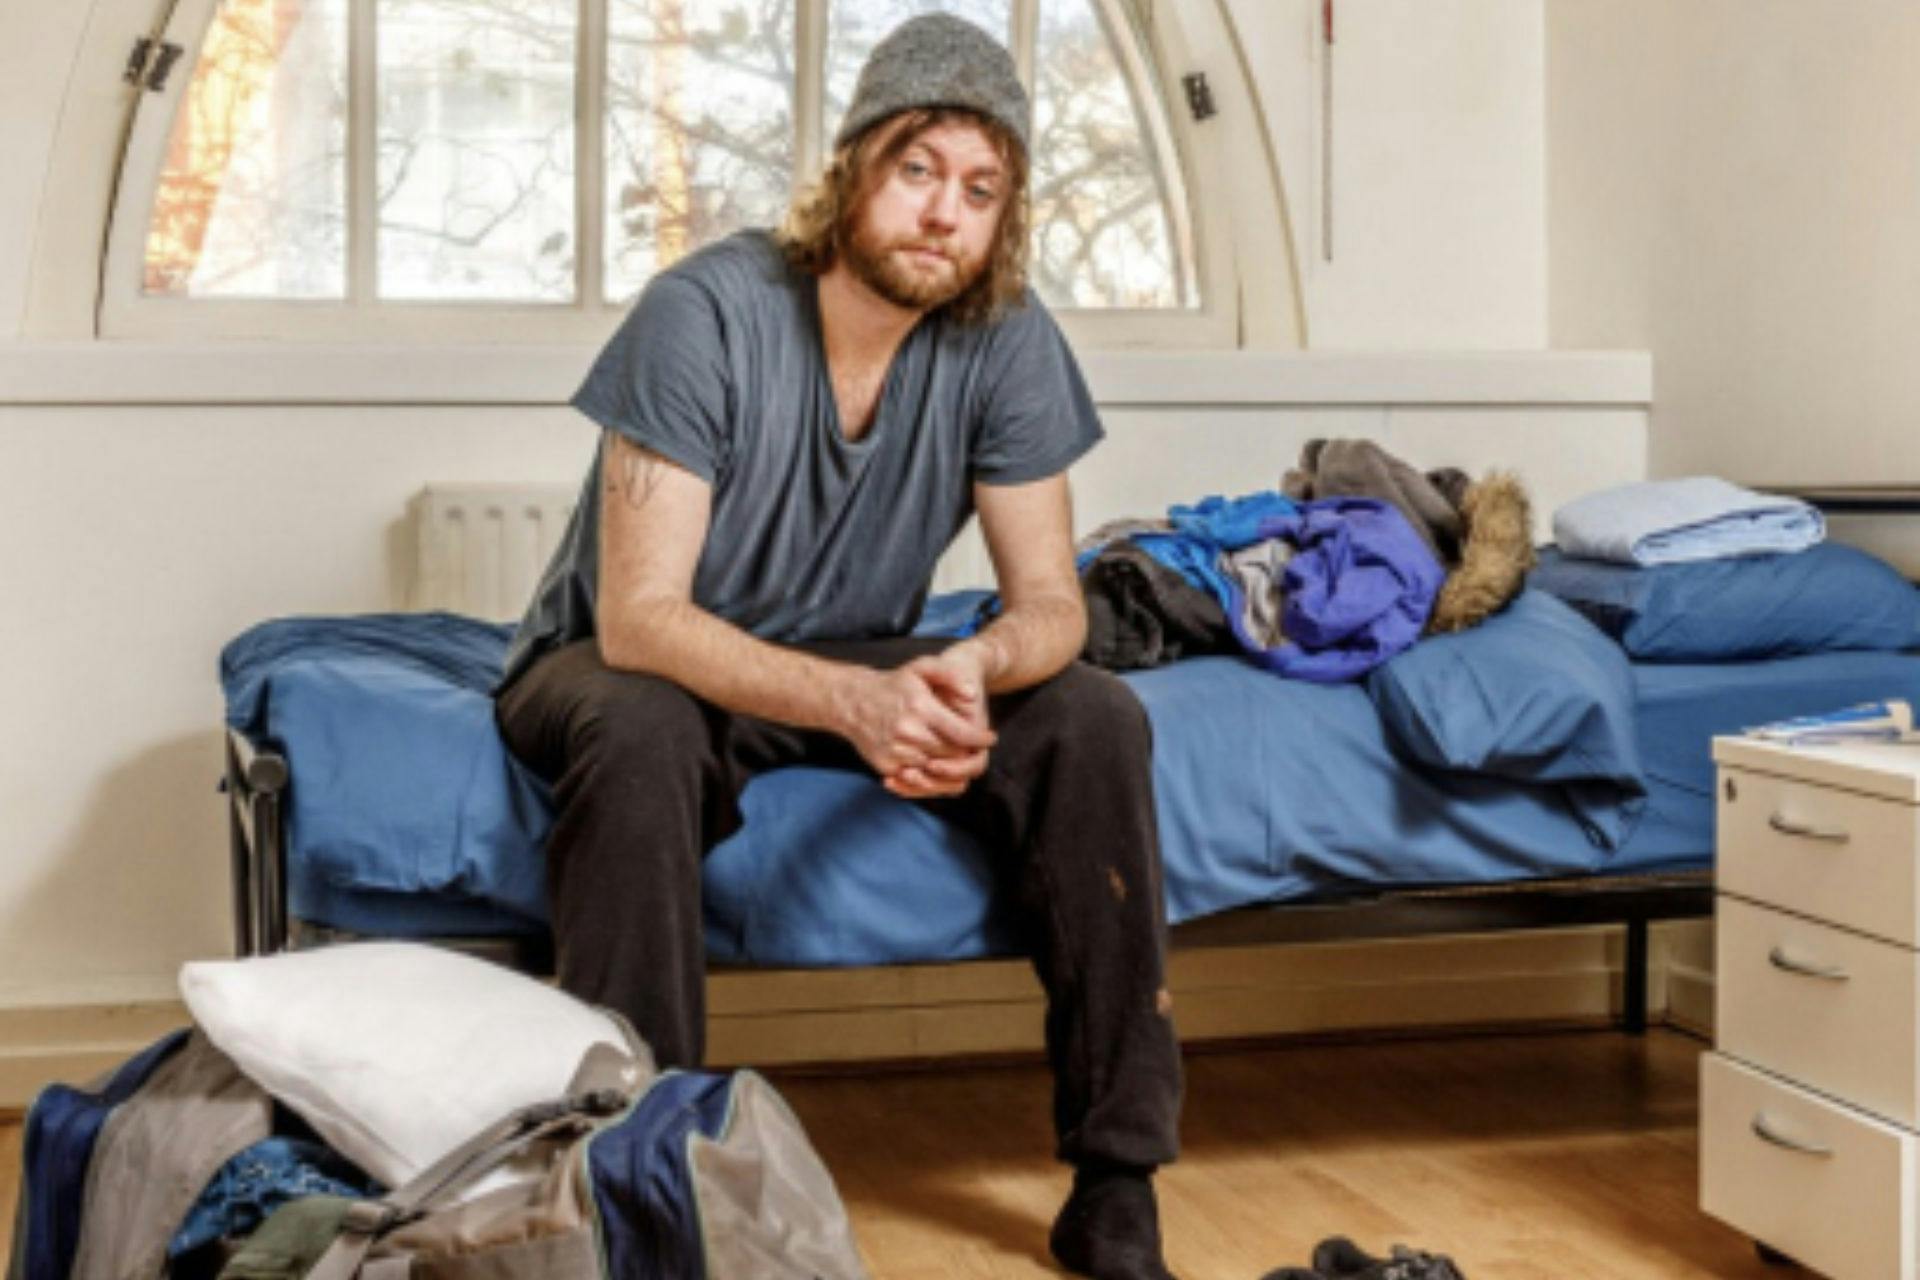 A man with a beard and beanie hat is sitting on the edge of a bed